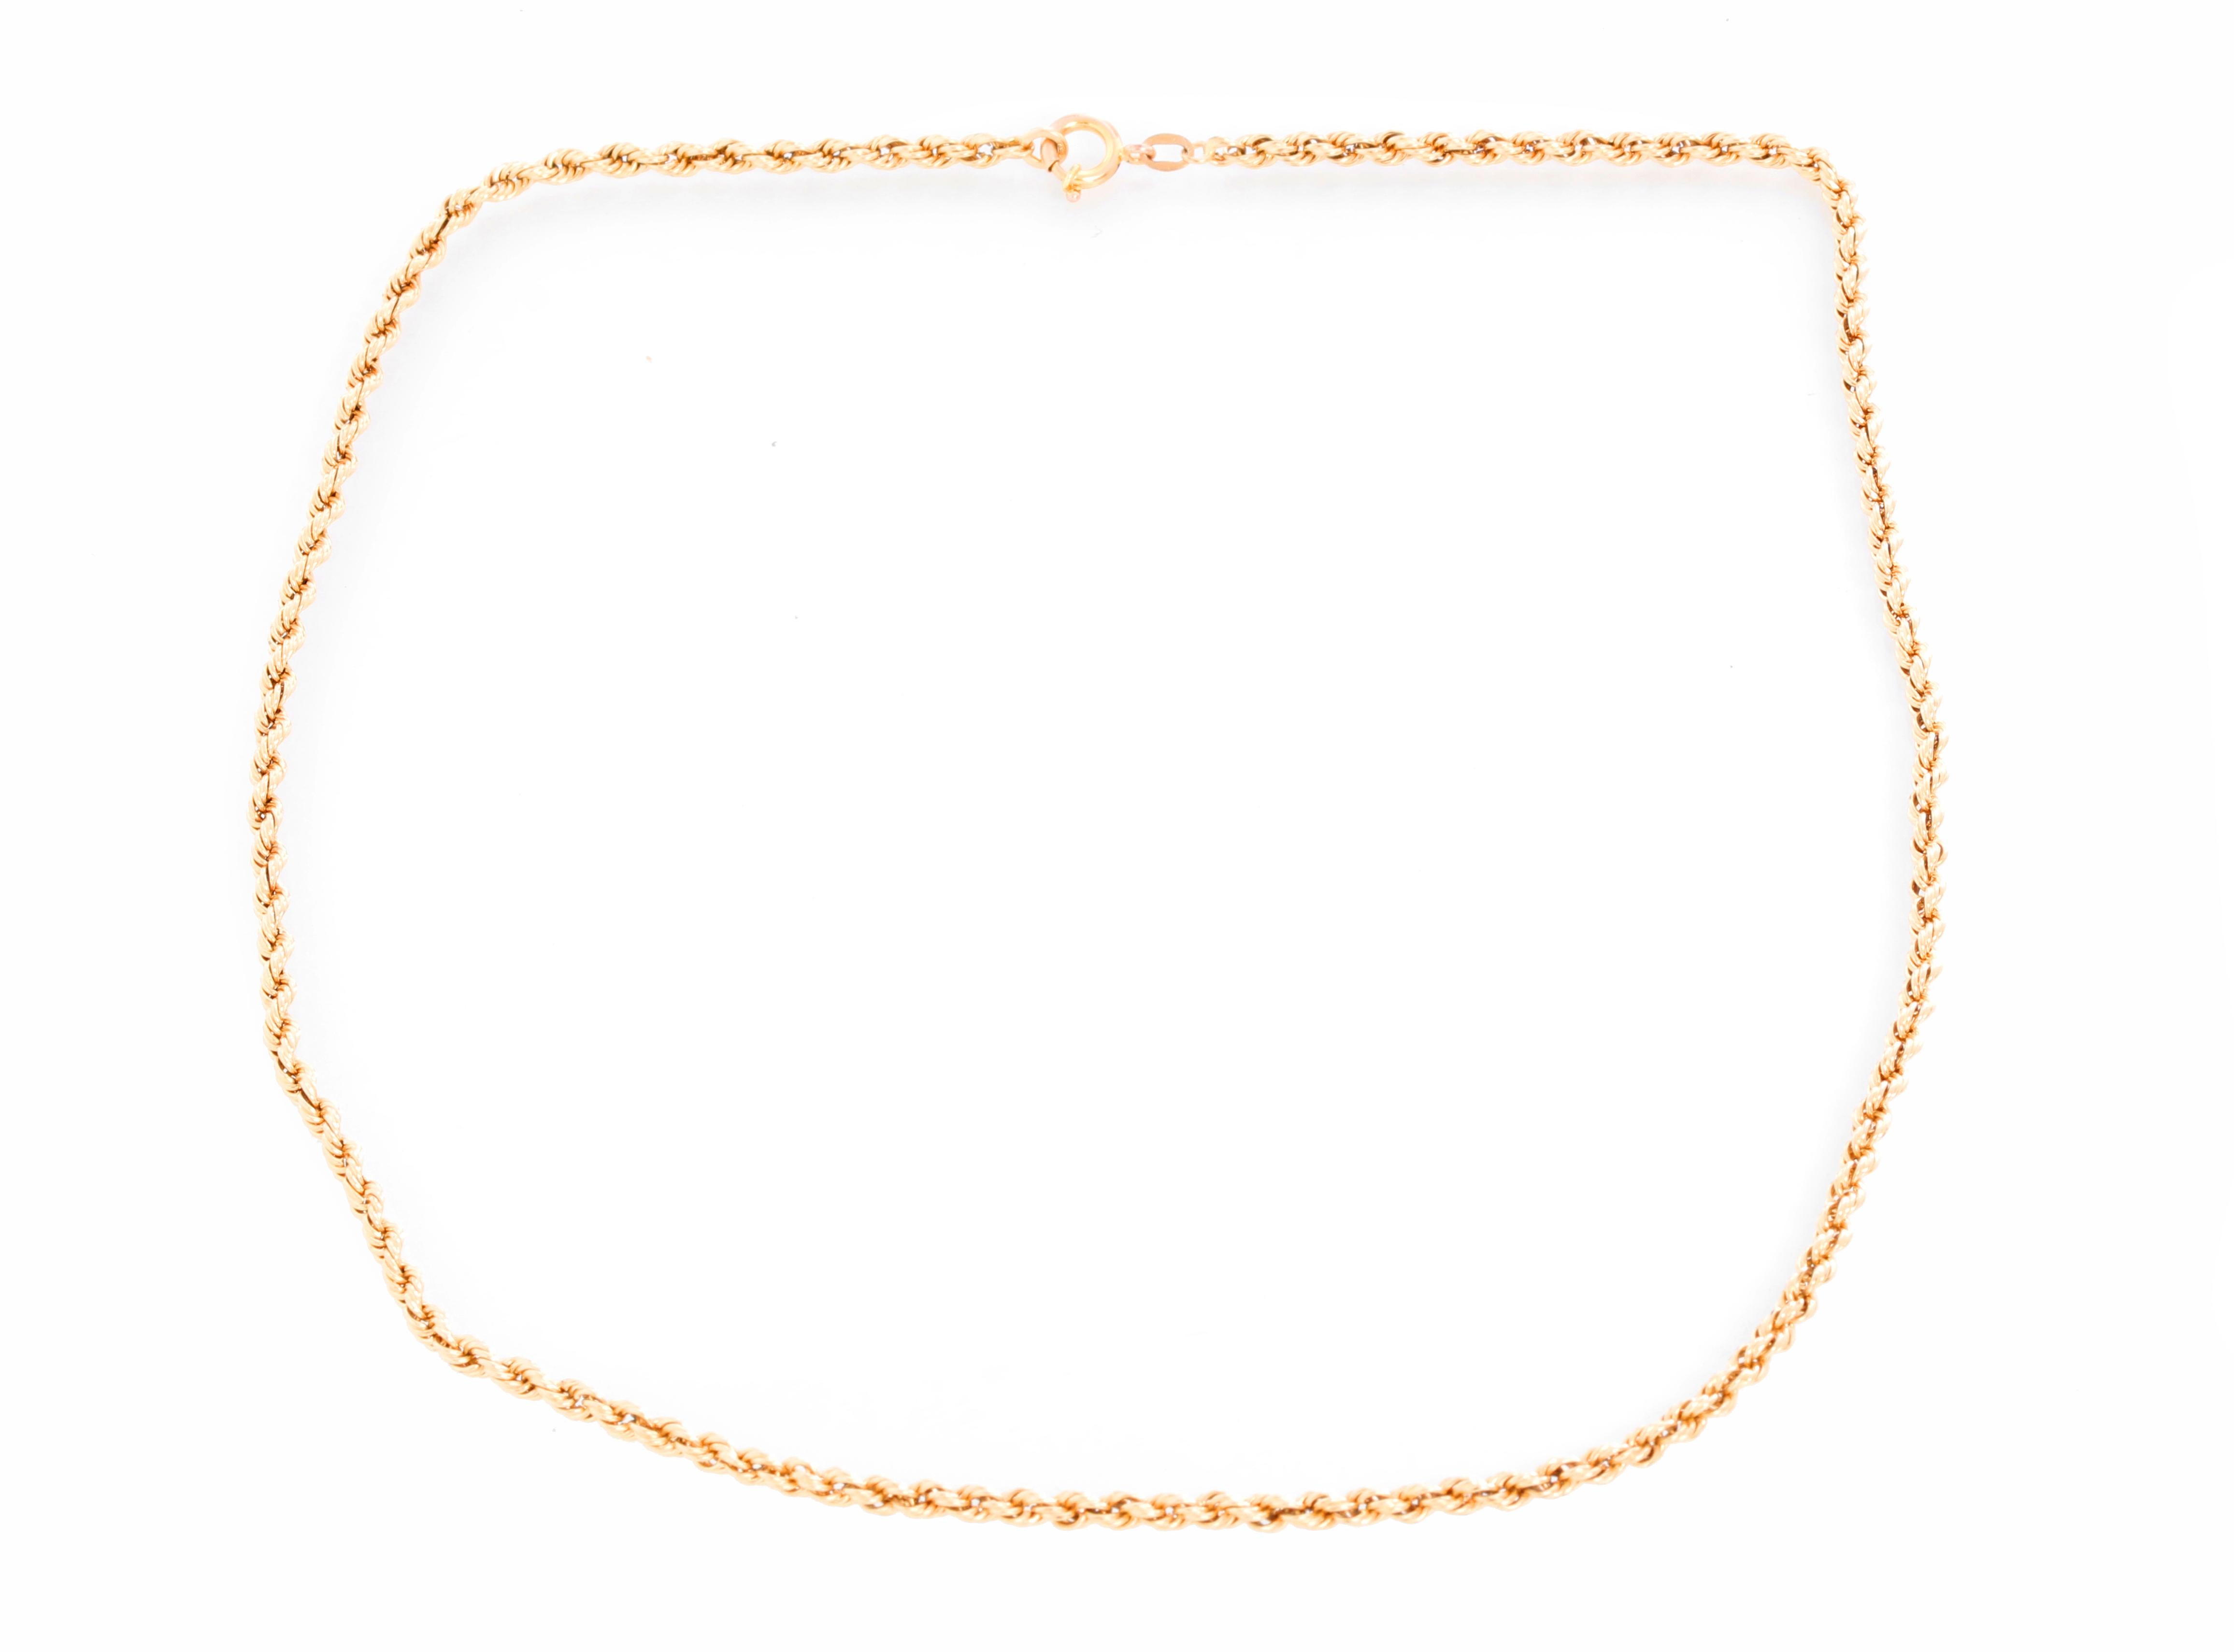 14K Yellow Gold Rope Chain - Measuring 18 inches. Total weight 7.5 grams. Perfect for a pendant or to wear by itself. Stamped 14 K .